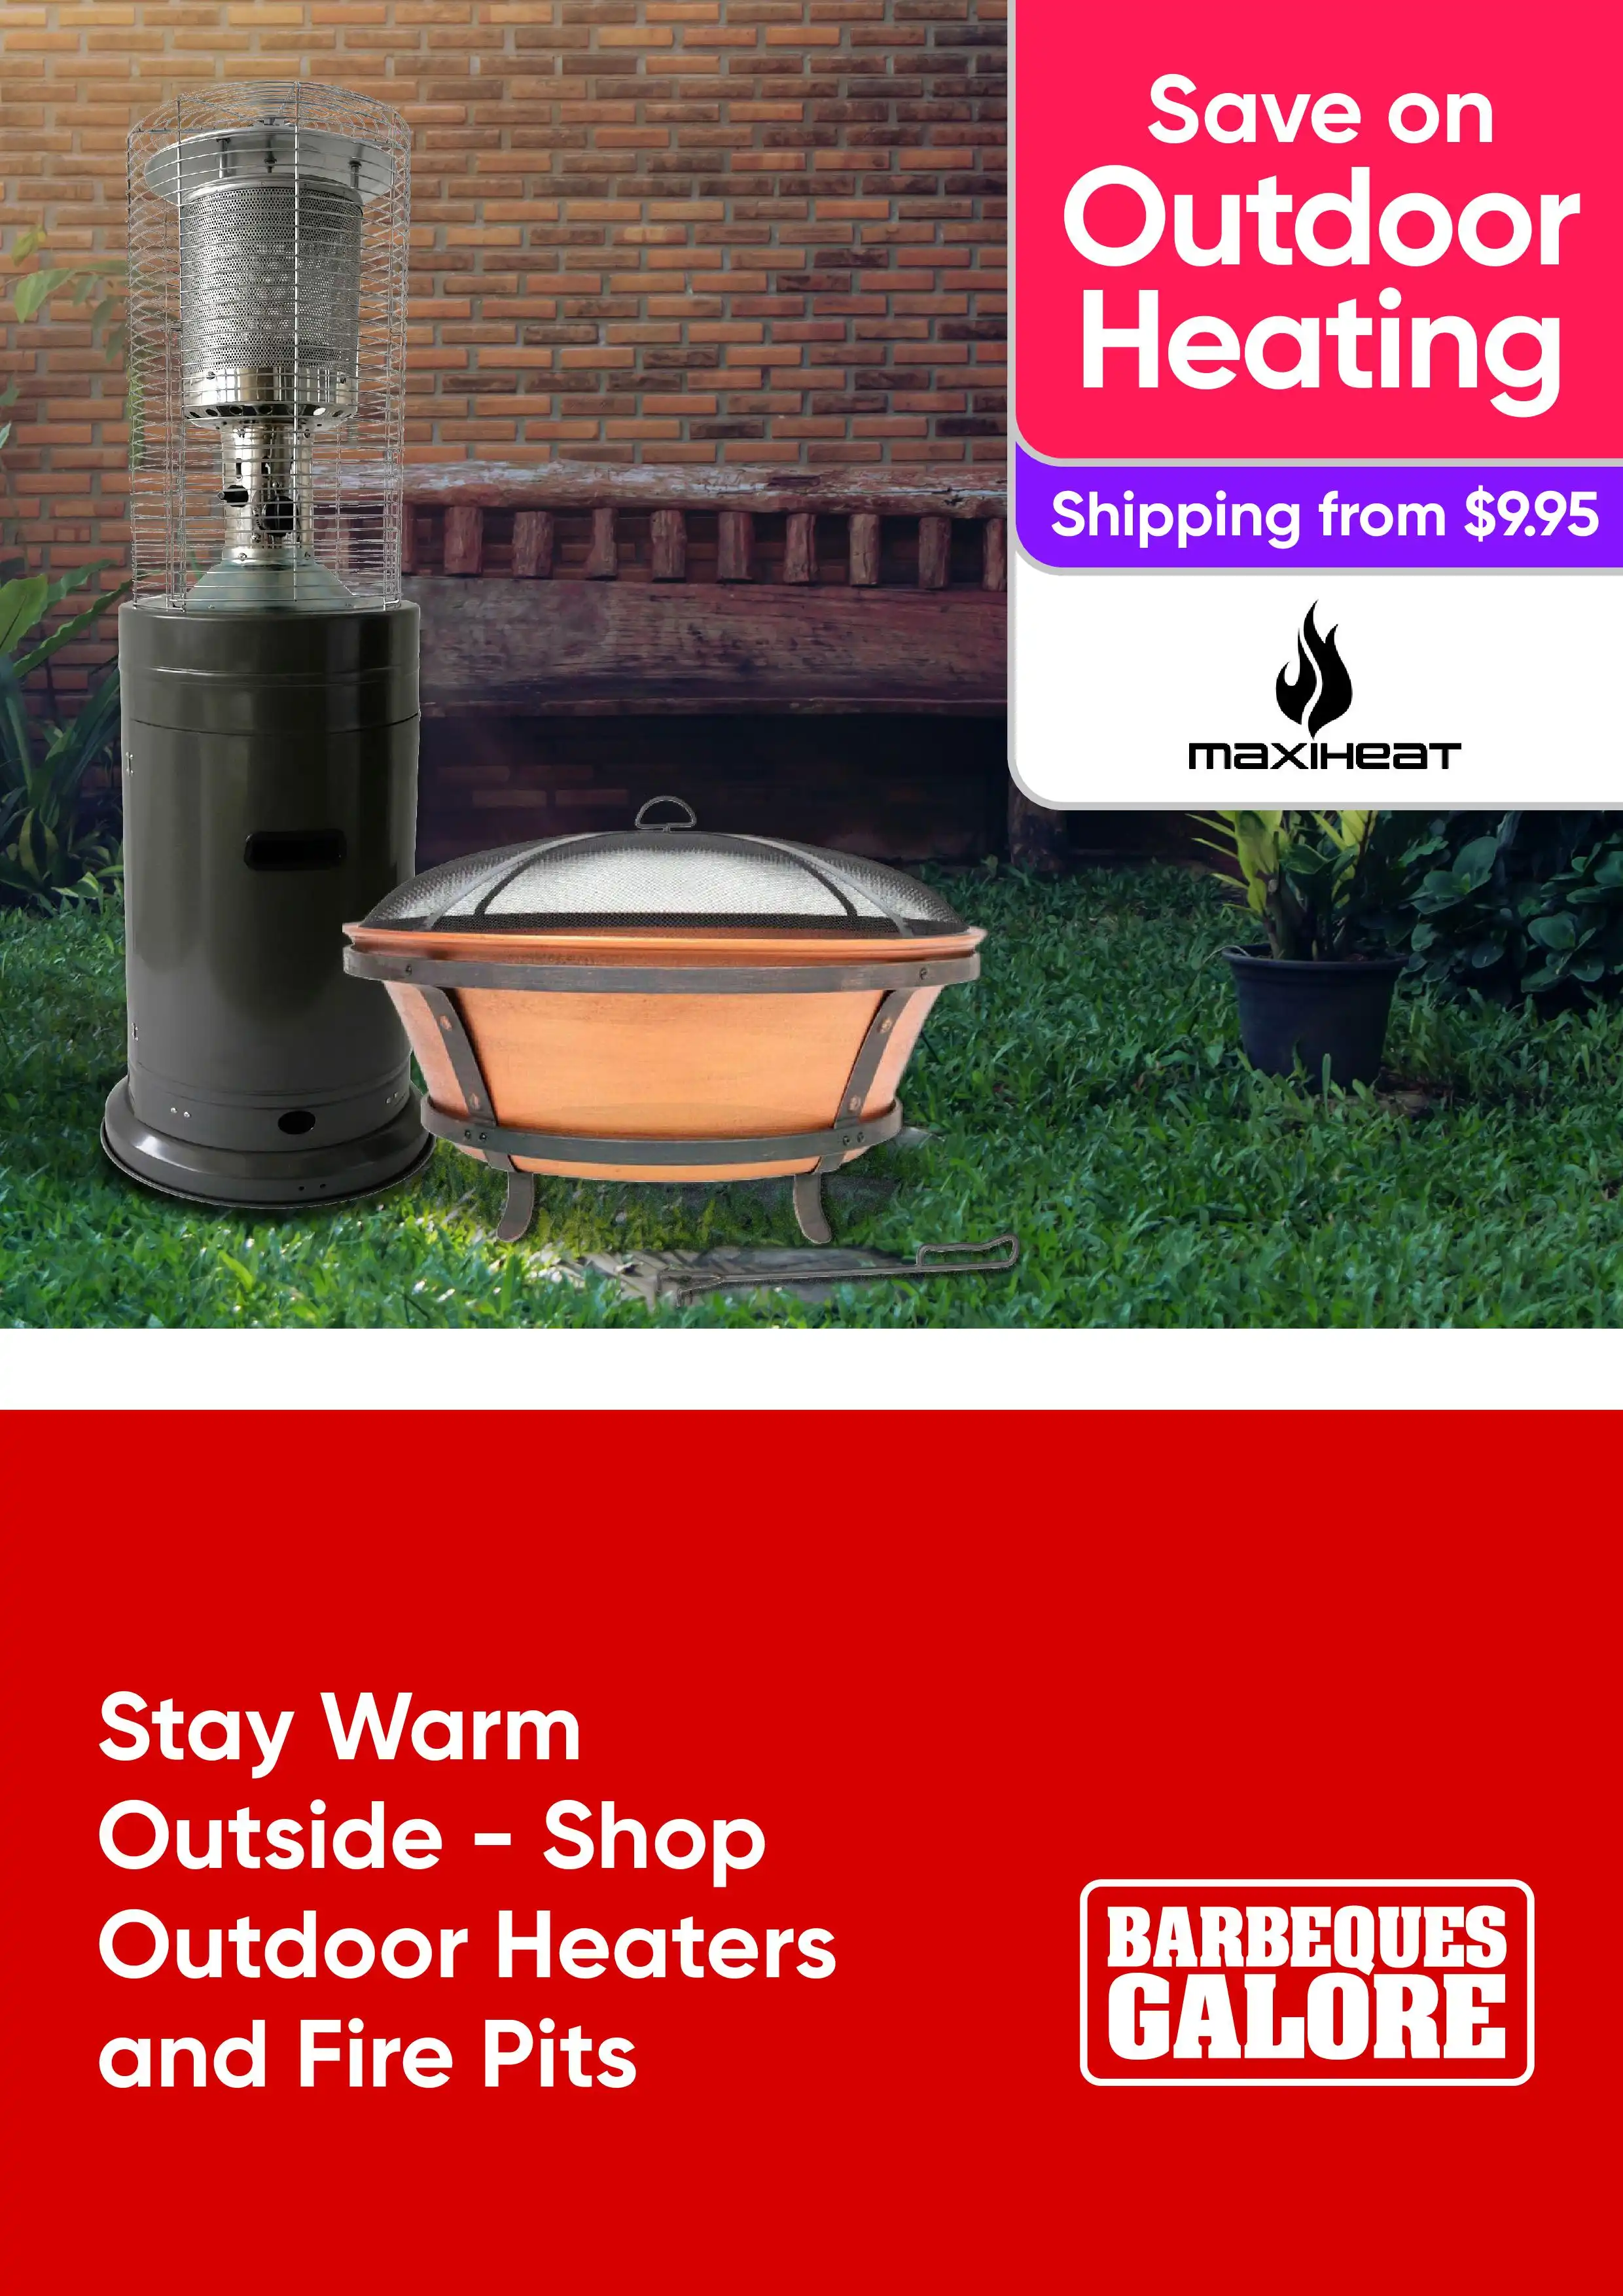 Stay Warm Outside - Shop Outdoor Heaters and Fire Pits